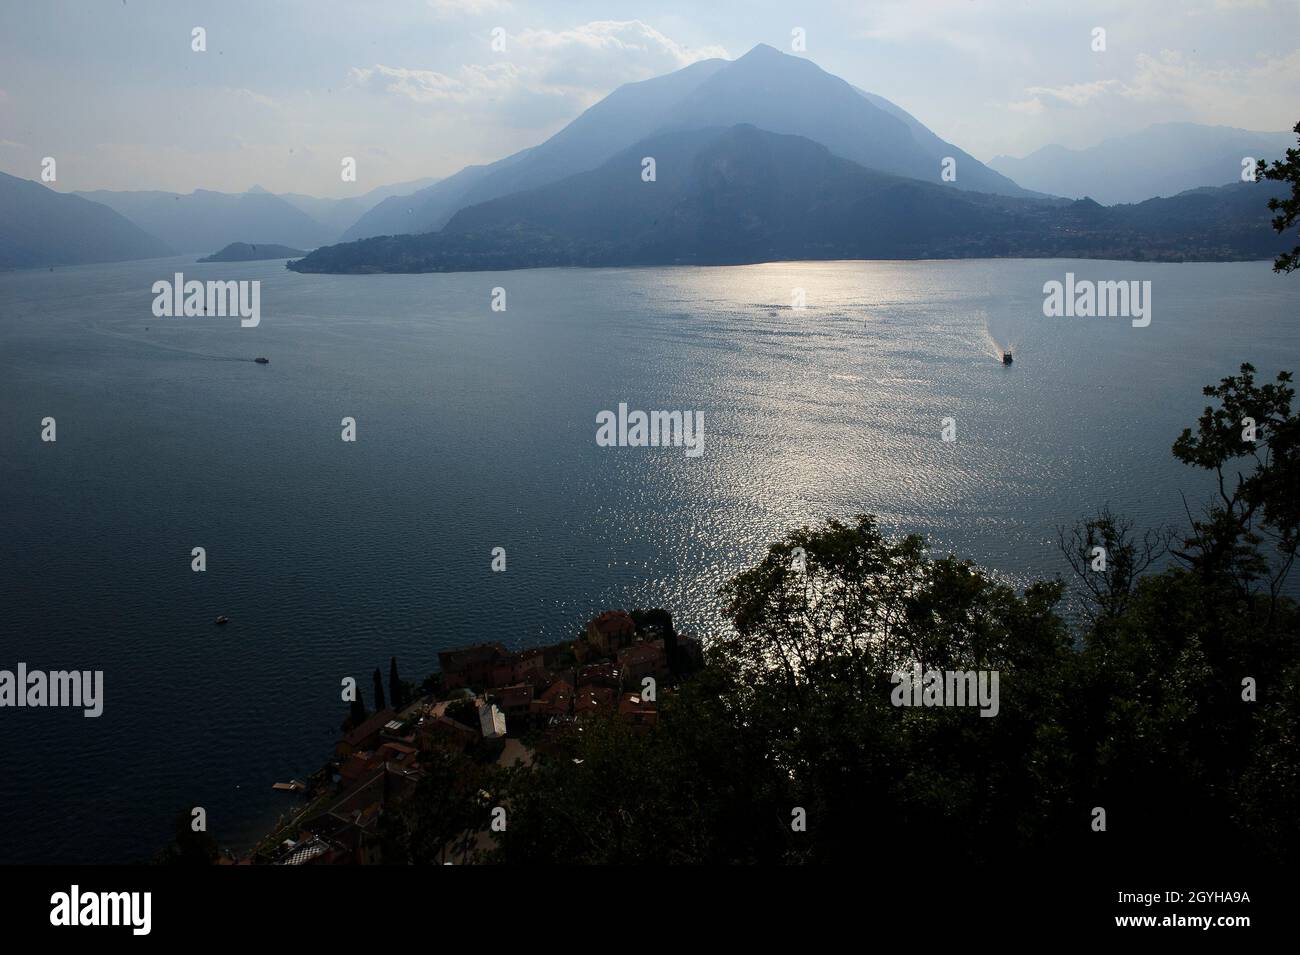 Europe, Italy, Lombardy, Lecco province, Lake Lario, Varenna, Vezio Castle and its ghosts. Stock Photo